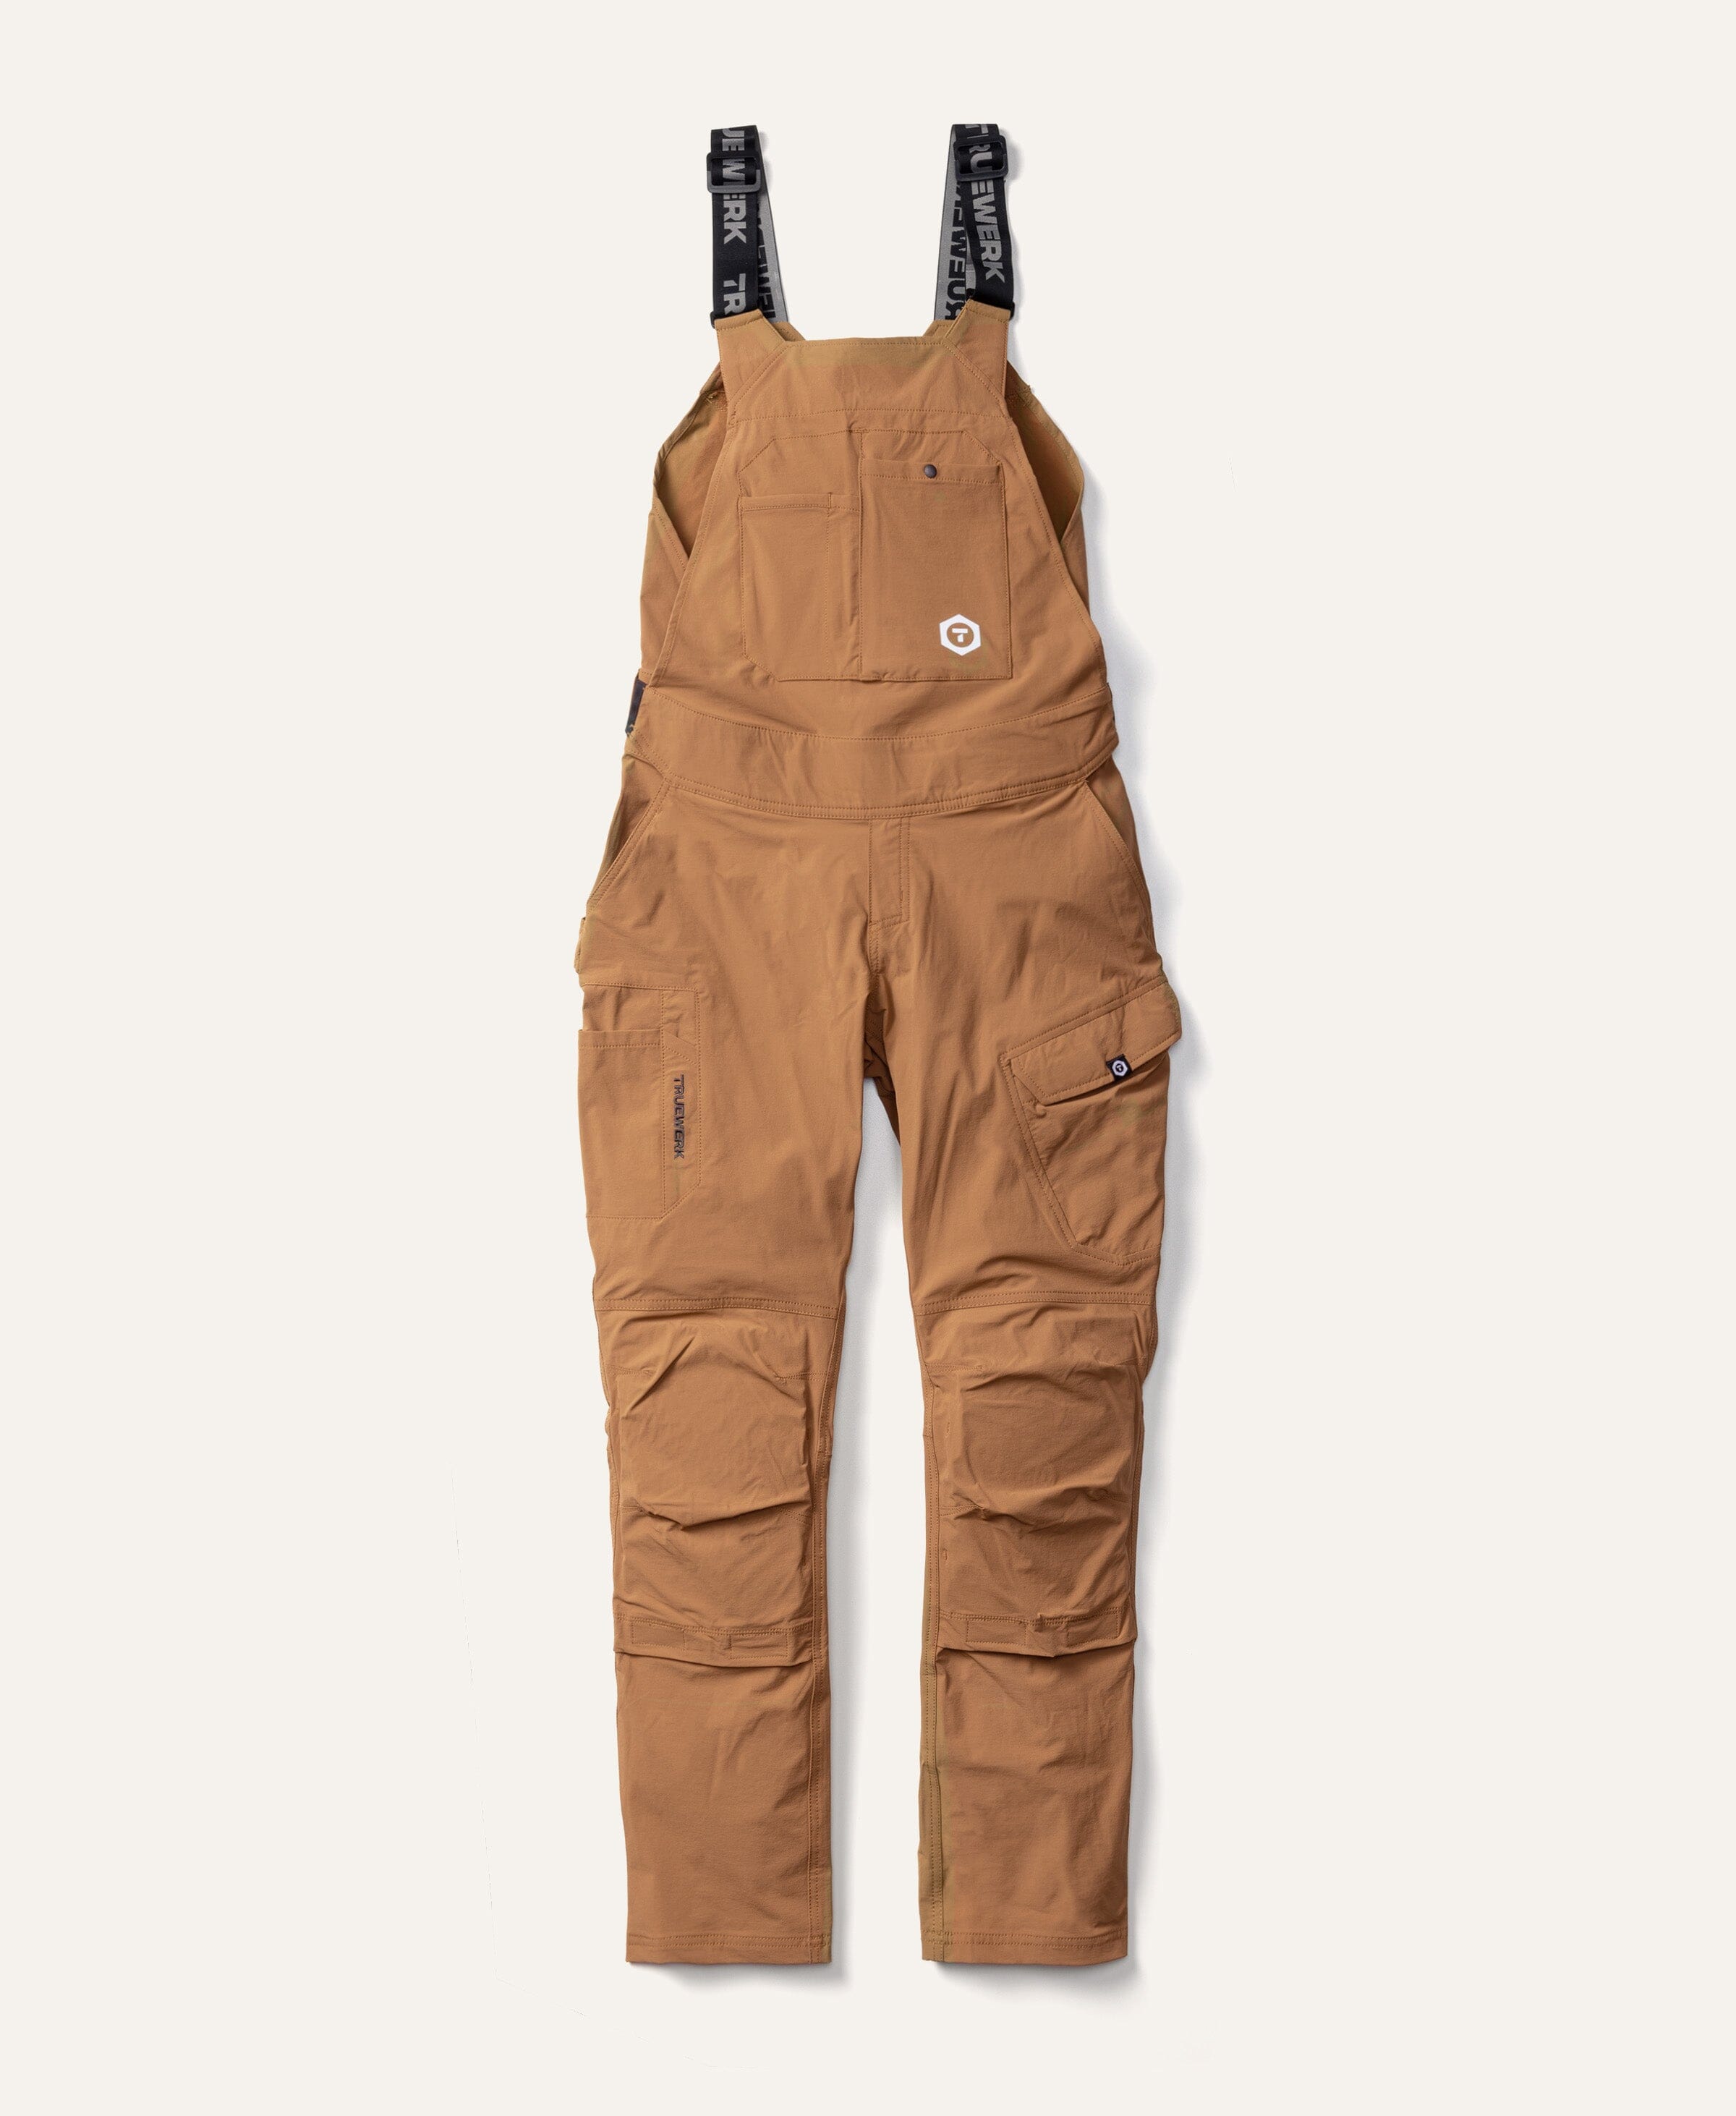 Womens Work Pants/Shorts Archives 